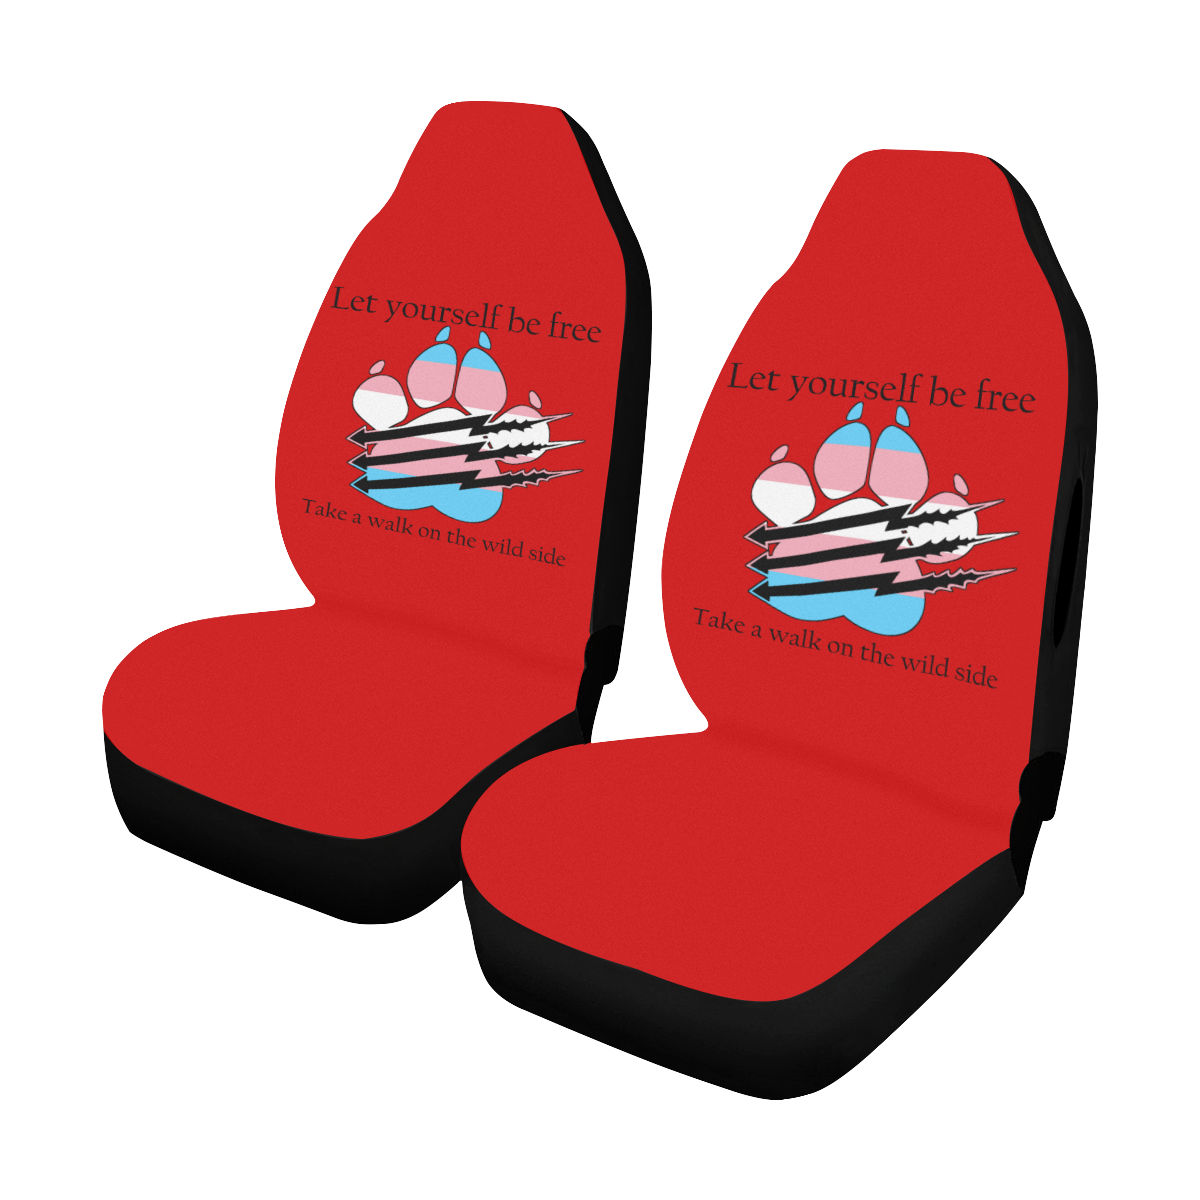 Trans Pride Car Seat Cover Airbag Compatible (Set of 2)